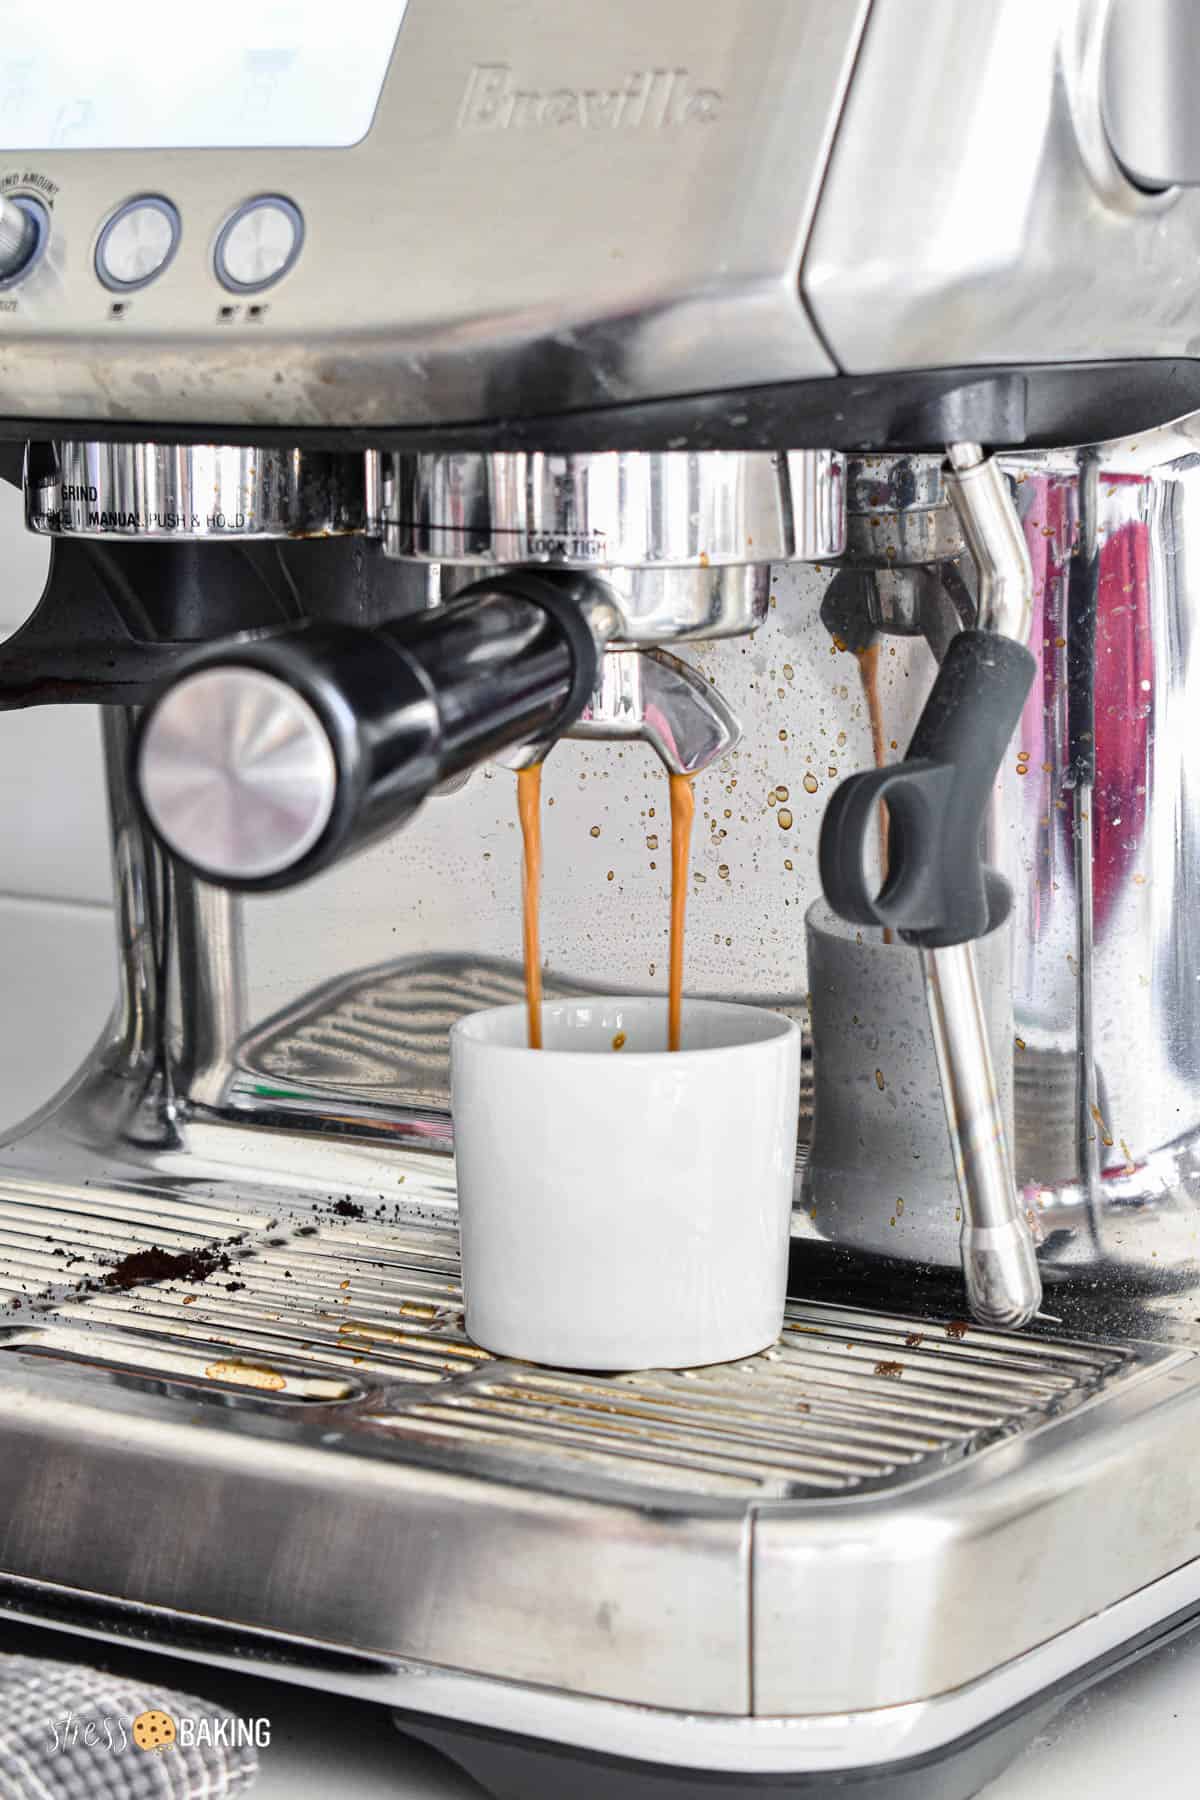 Espresso being brewed from a Breville into a white demitasse cup